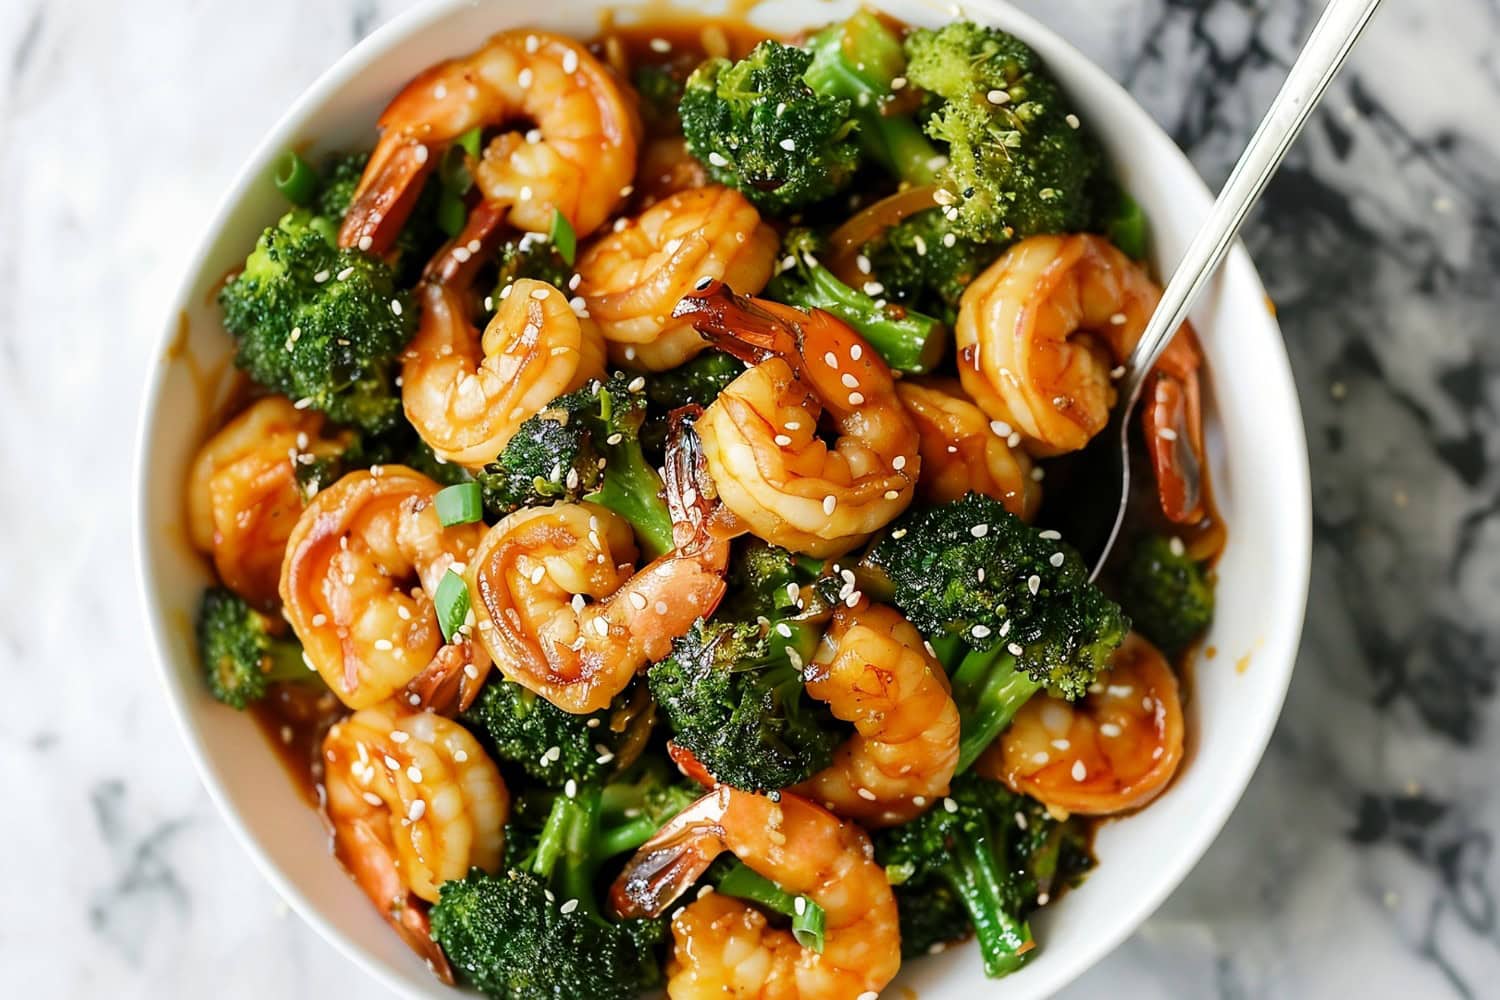 Classic shrimp and broccoli stir-fry, a quick and easy weeknight dinner that's packed with protein and veggies